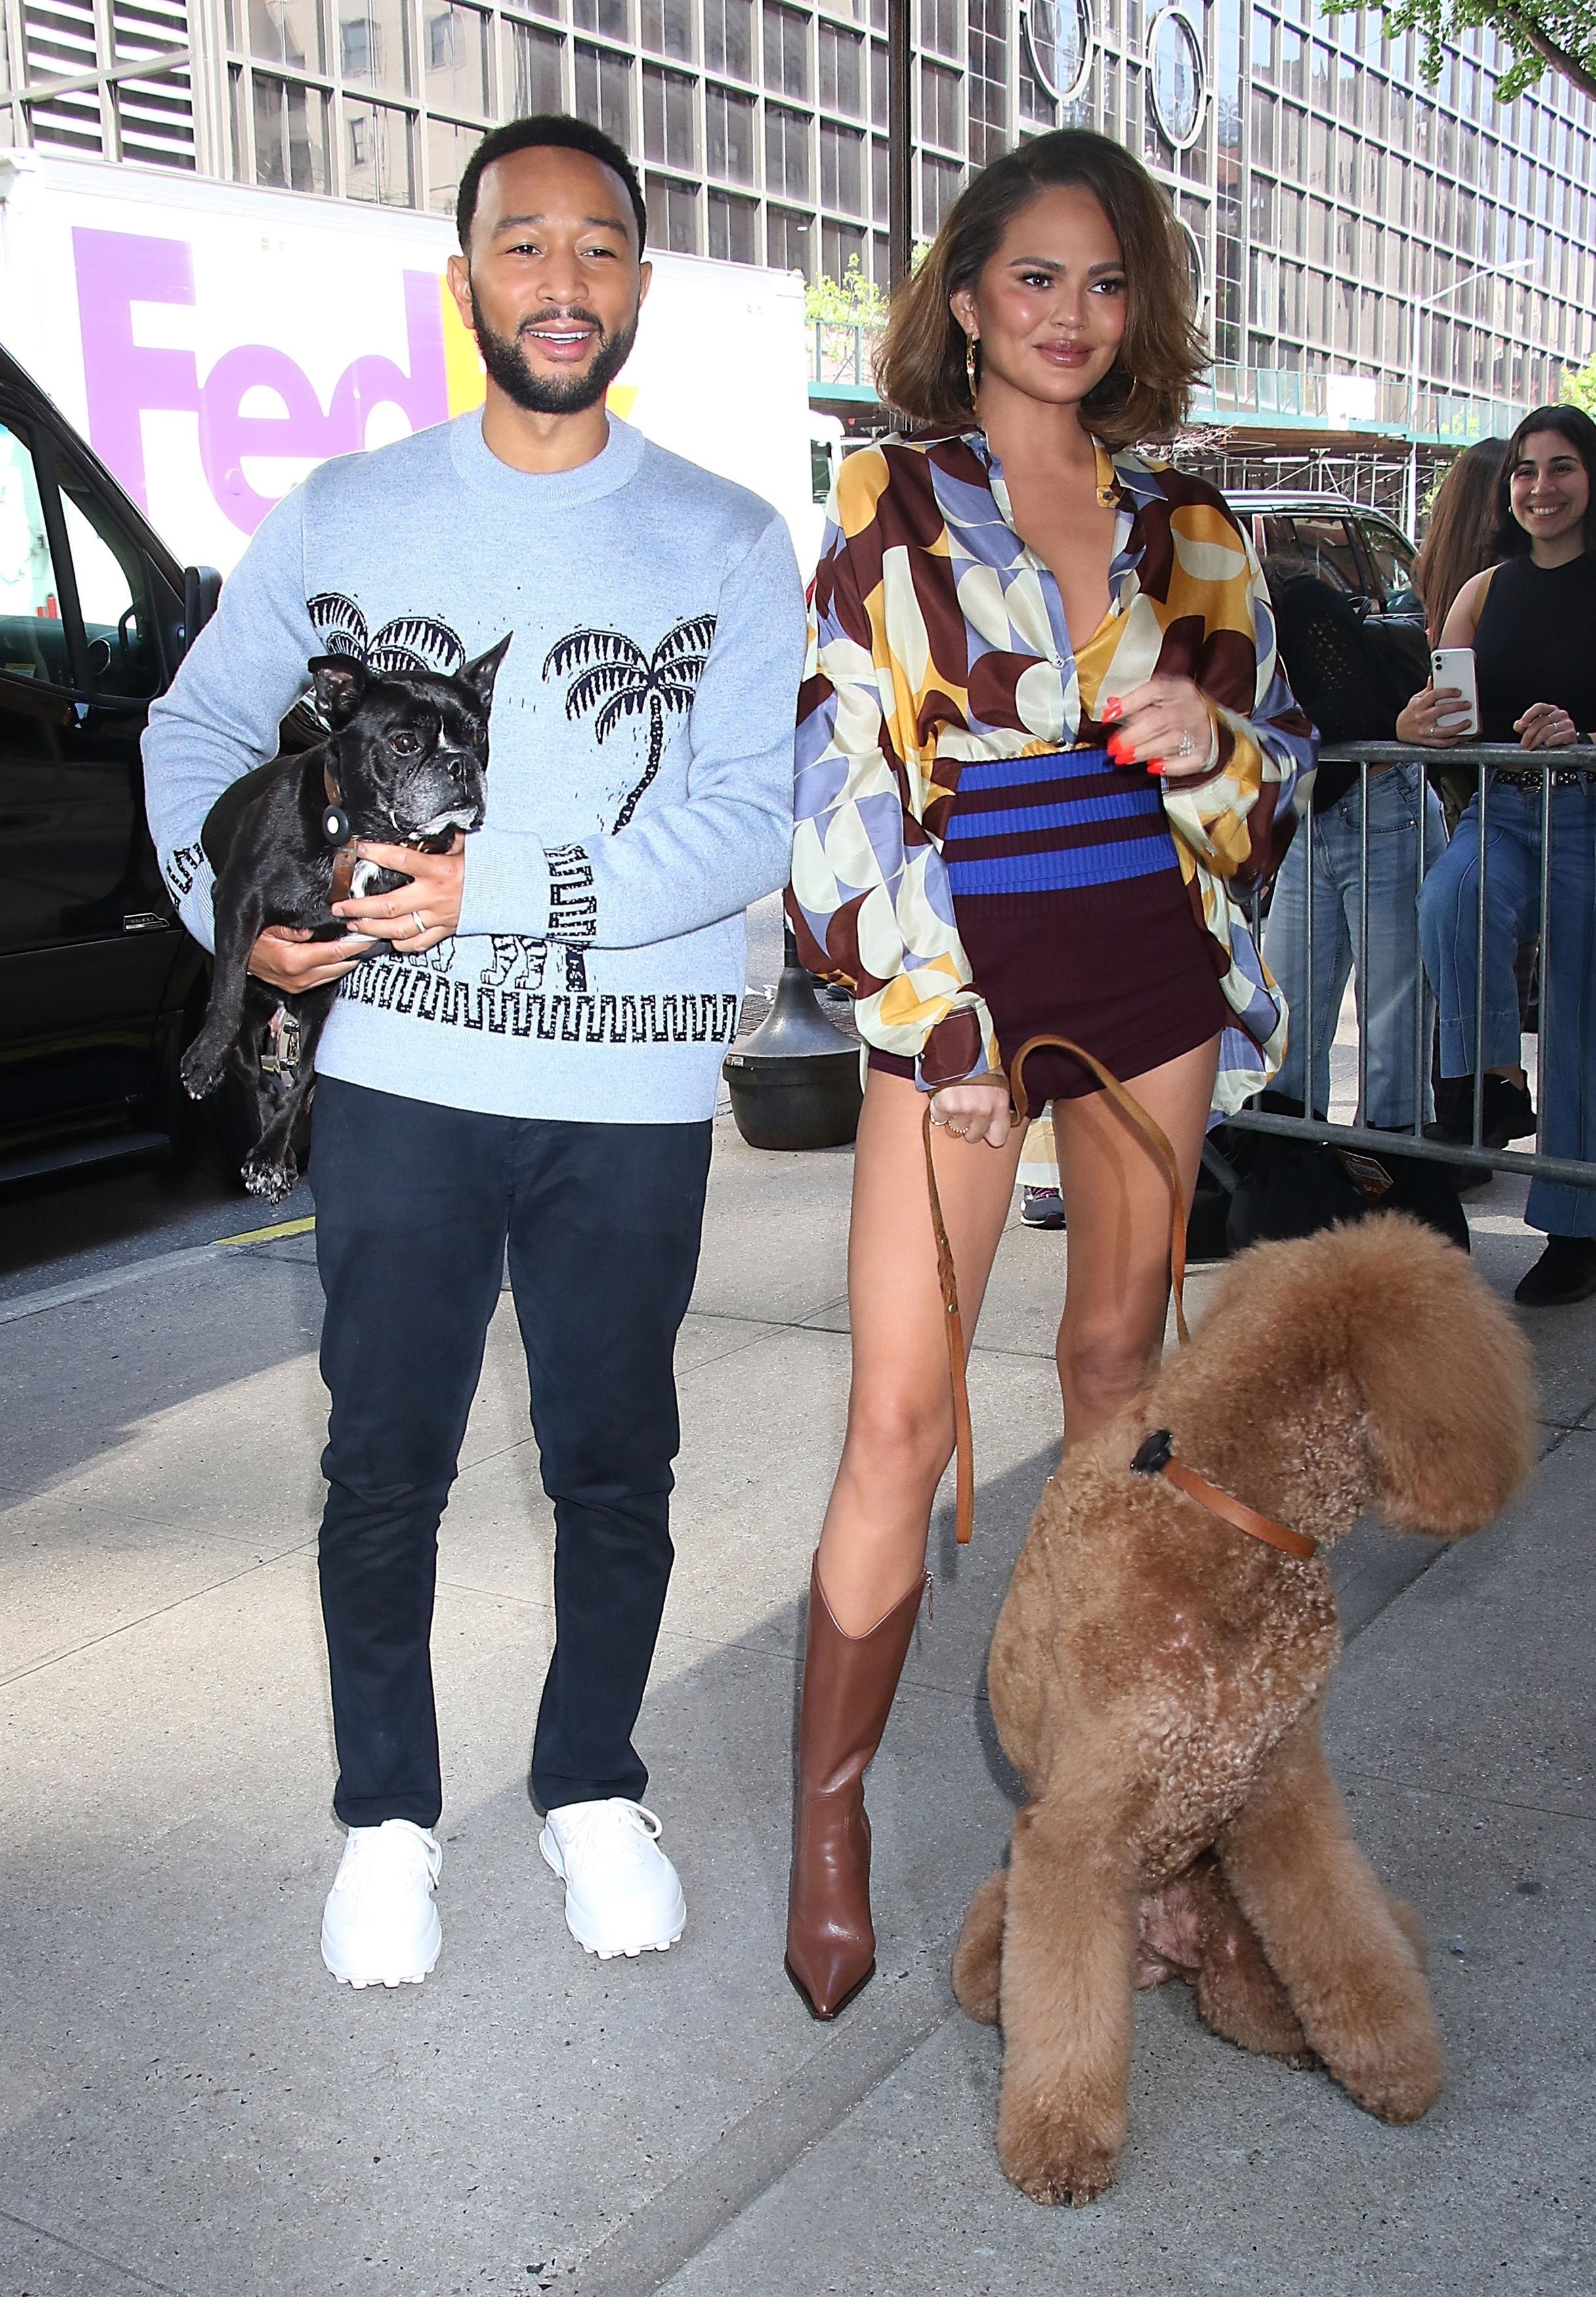 John Legend carried his furry companion as he walked with Chrissy